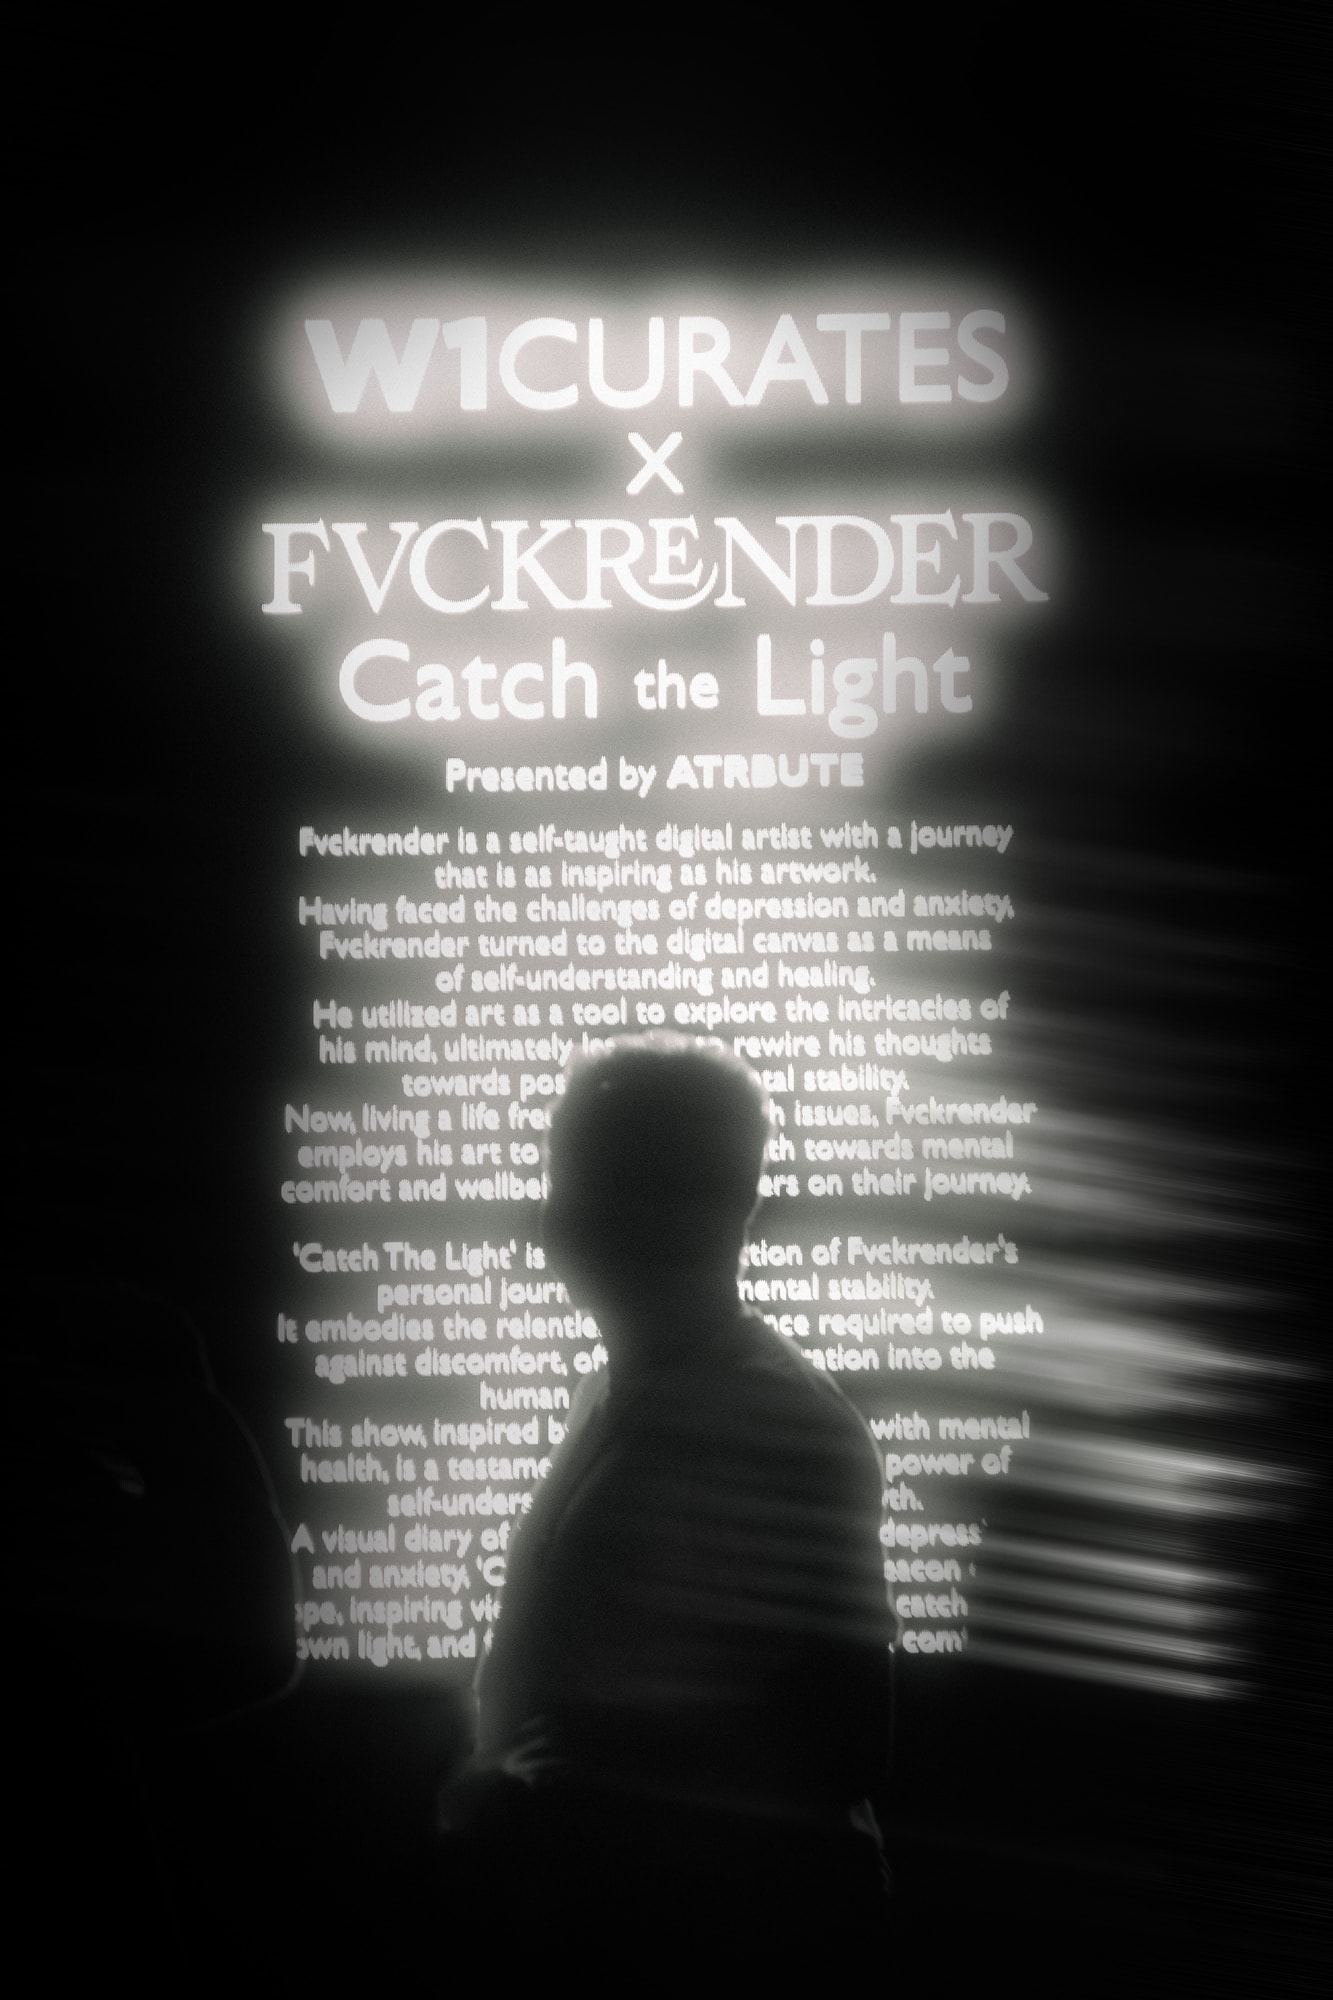 FVCKRENDER 'Catch the Light' Exhibition